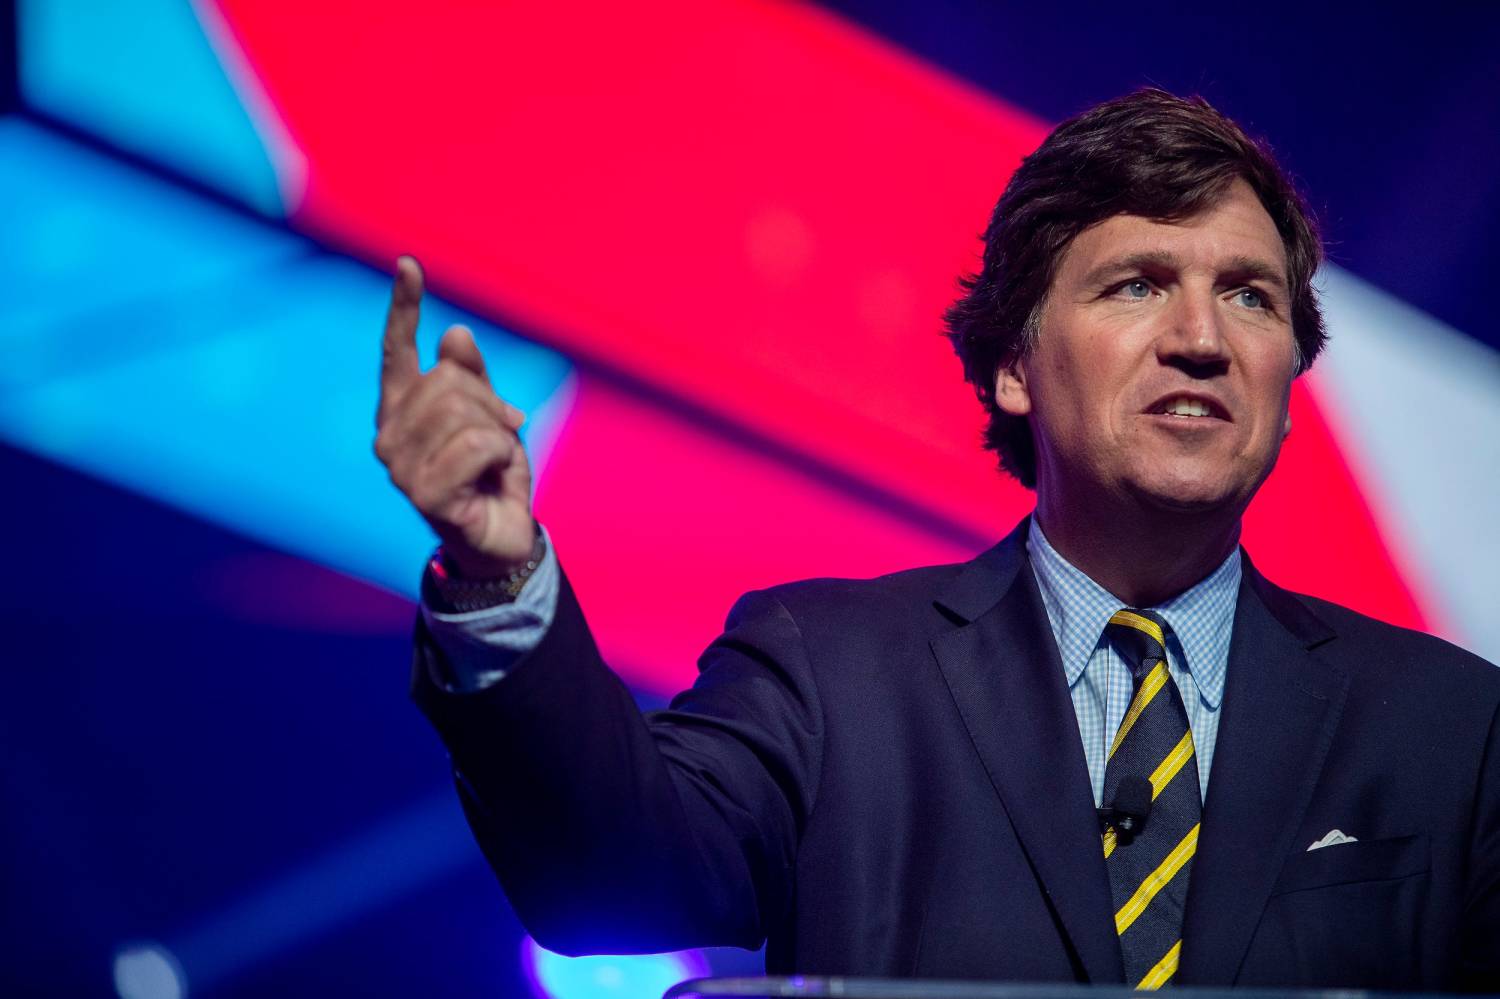 Tucker Carlson speaks during the first day of the America Fest 2021 hosted by Turning Point USA on Saturday, Dec. 18, 2021, in Phoenix.Uscp 7iwow2zkgjnq90mp8hb Original